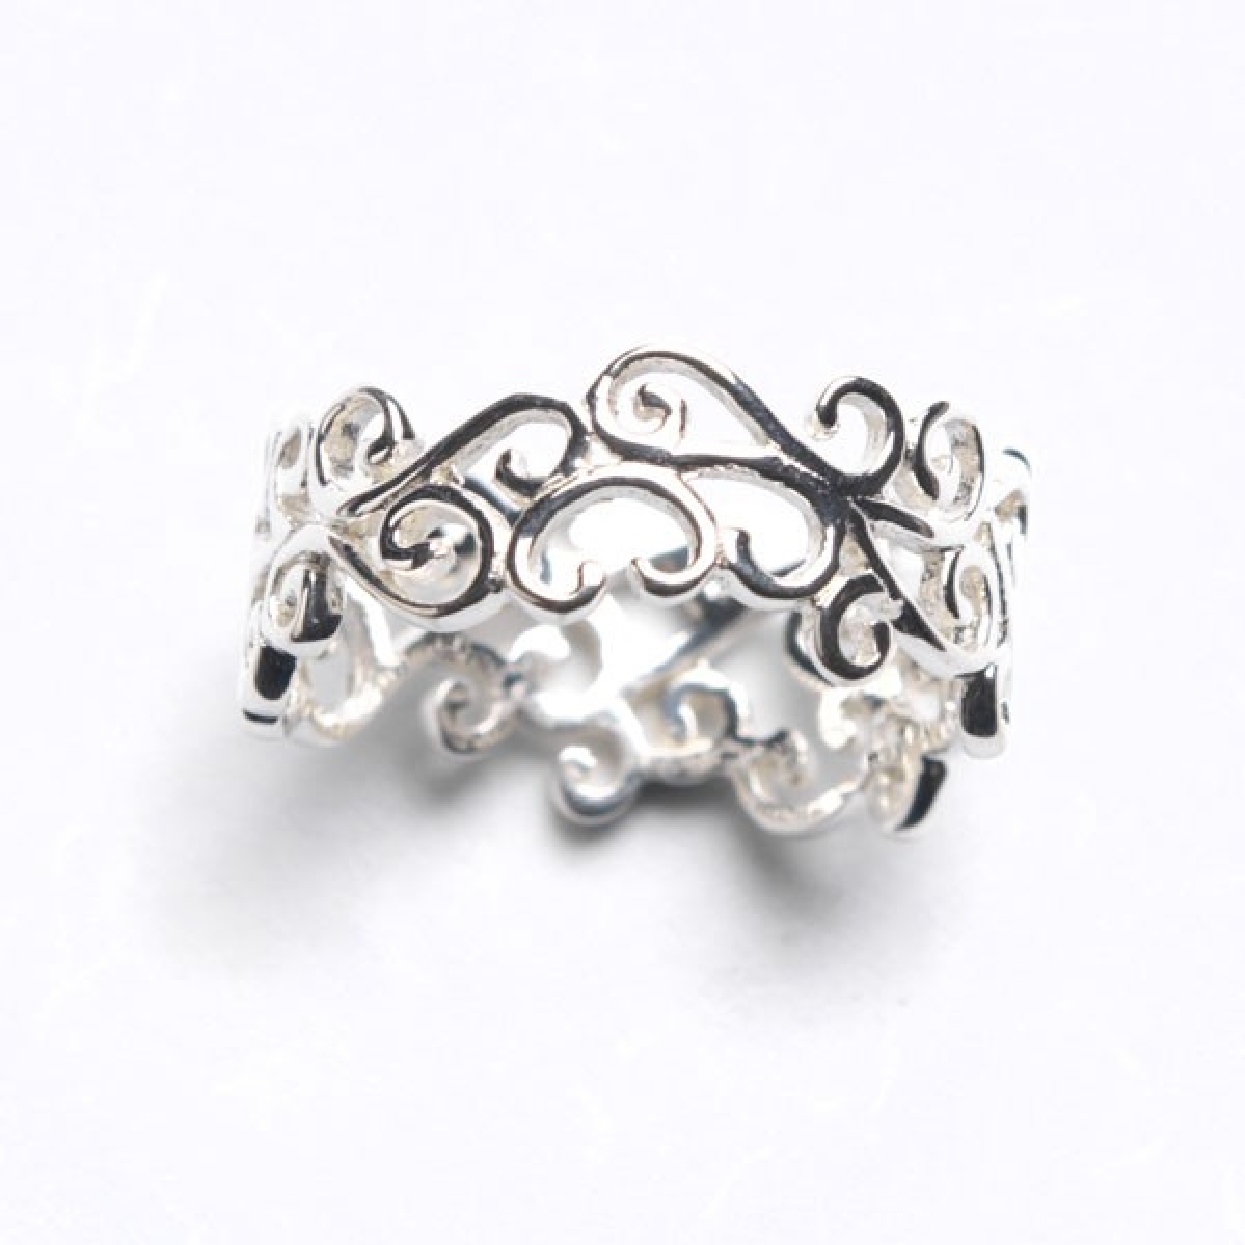 Sterling silver Courtyard Scroll Ring
from the Southern Gates® Courtyard Series. Size 6. R155/6